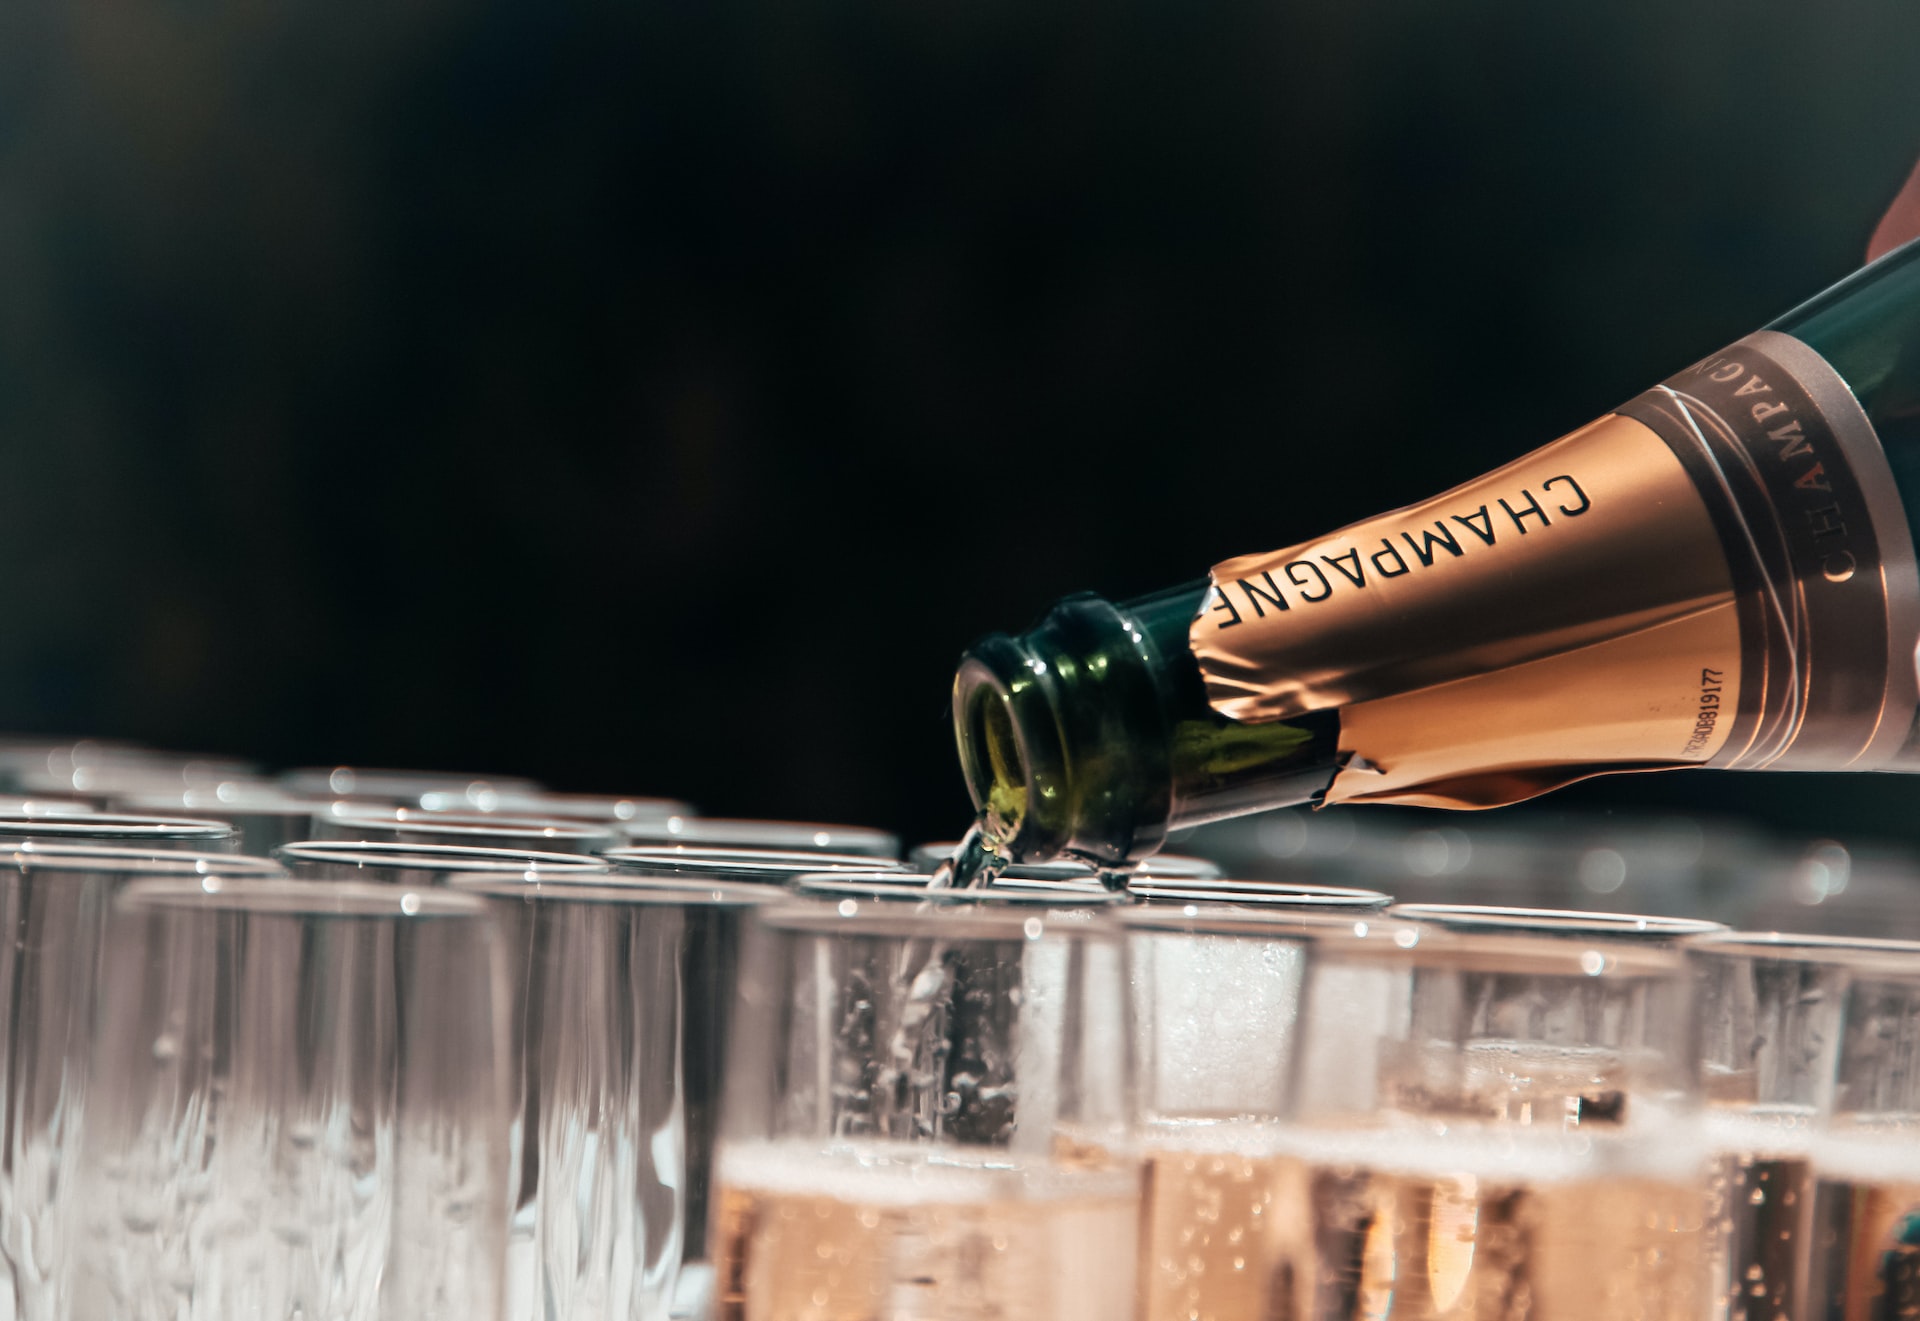 How to Find the Best Champagne for Your Venue